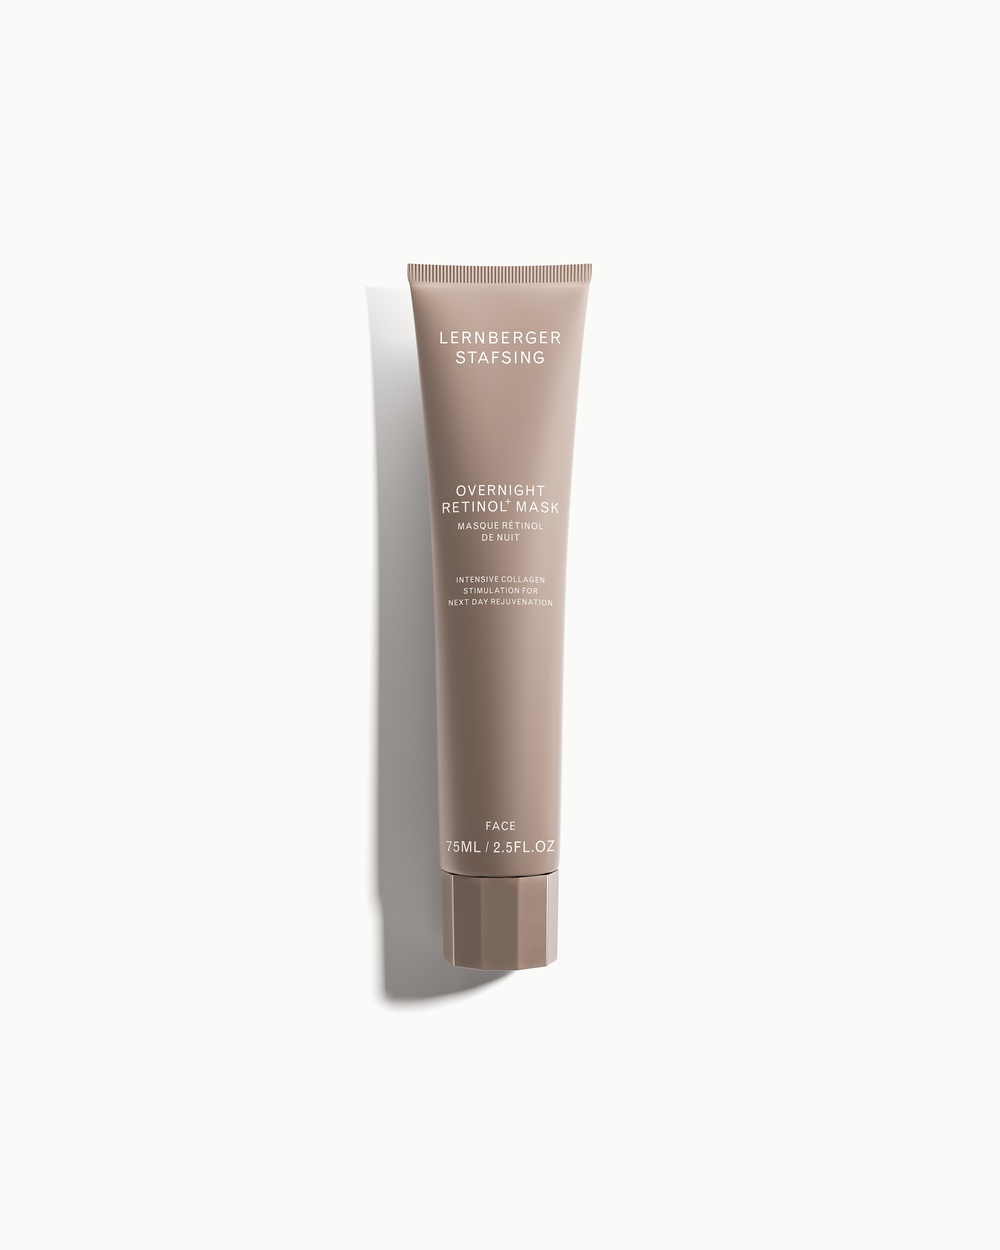 Transformative overnight mask for intensive hydration and improved firmness. It helps diminish age spots, fine lines and wrinkles. A high-performance blend of Vitamin A and Vitamin A boosters; retinyl palmitate, bakuchiol and algae extract together with intensive moisturisers; hyaluronic acid, aloe vera and biosaccharide stimulates the skin’s natural production of collagen and promotes a more radiant skin tone, softer surface texture, and a hydrated plumpness whilst brightening and evening out skin tone. Quick absorbing lipids from black cumin oil and squalane nourish and soften the skin in depth.